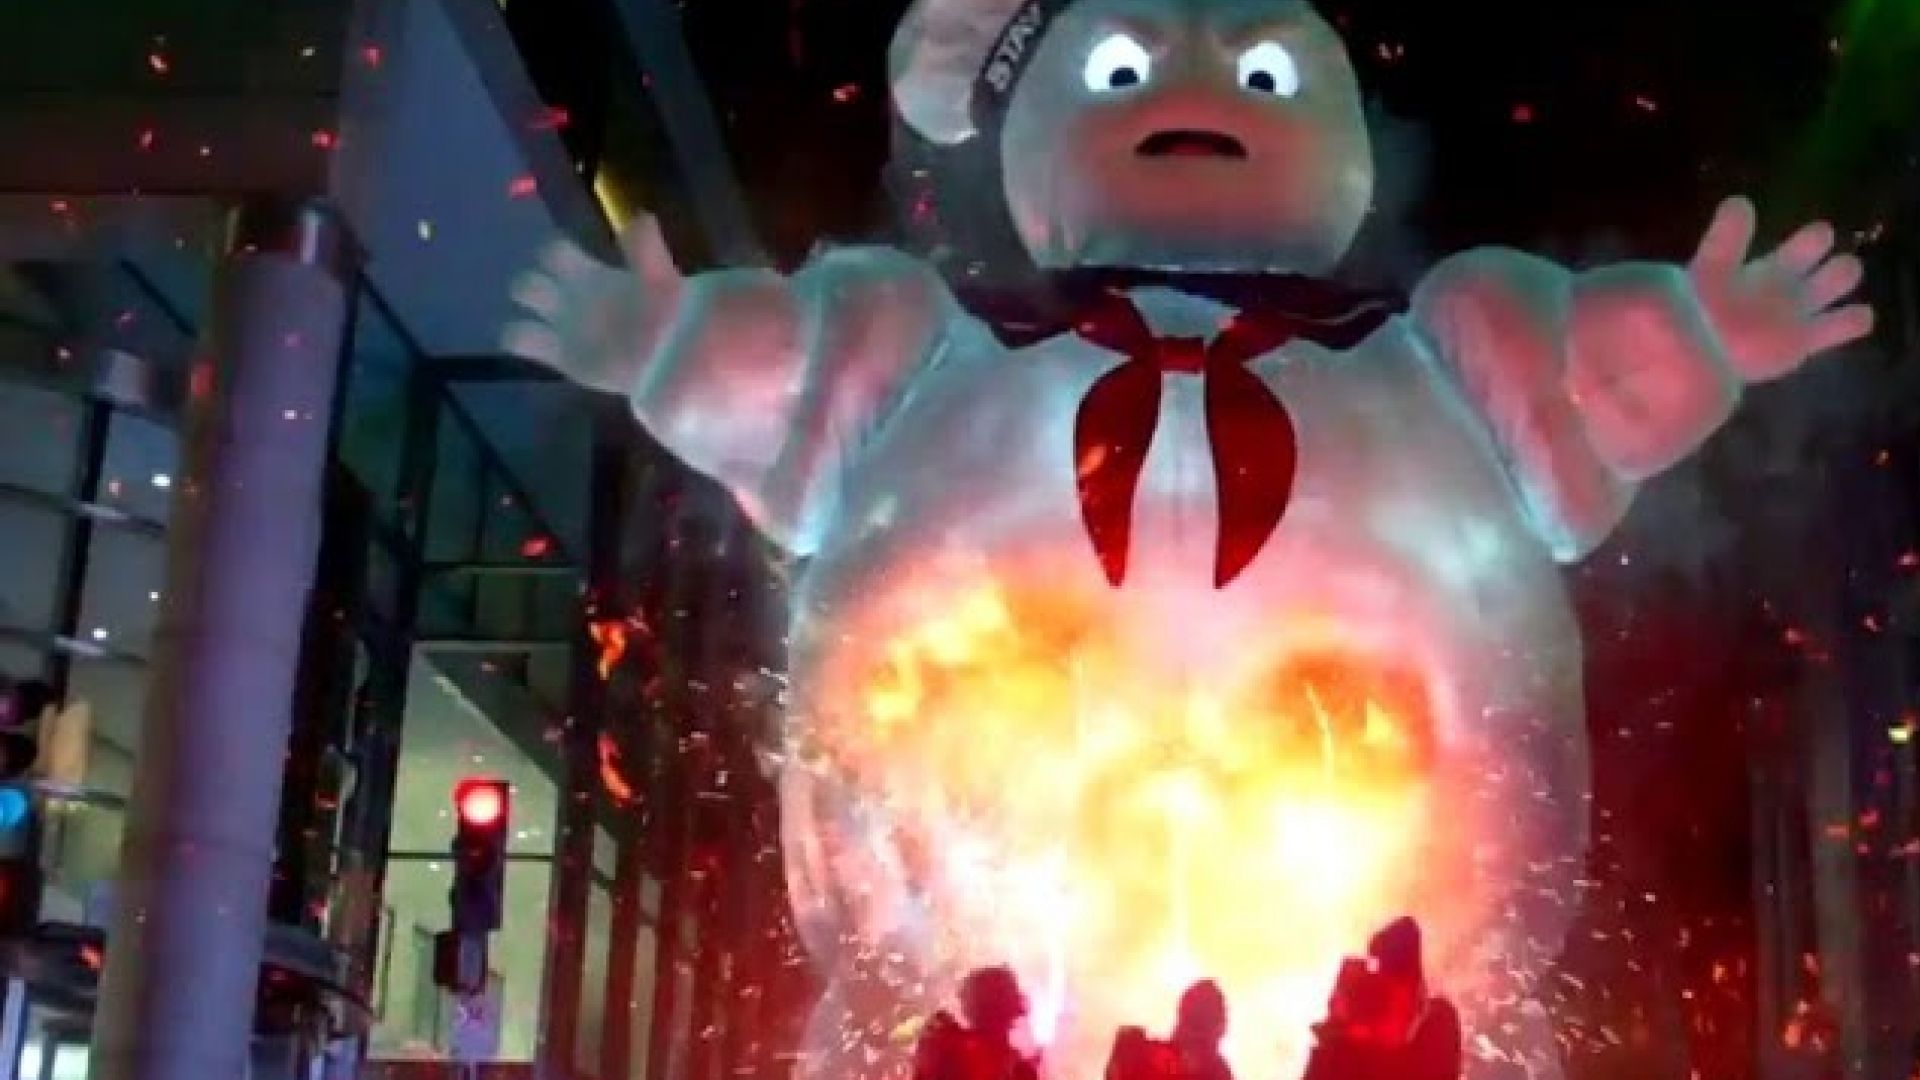 &quot;Ghostbusters&quot; TV Spot #2 - Stay Puft